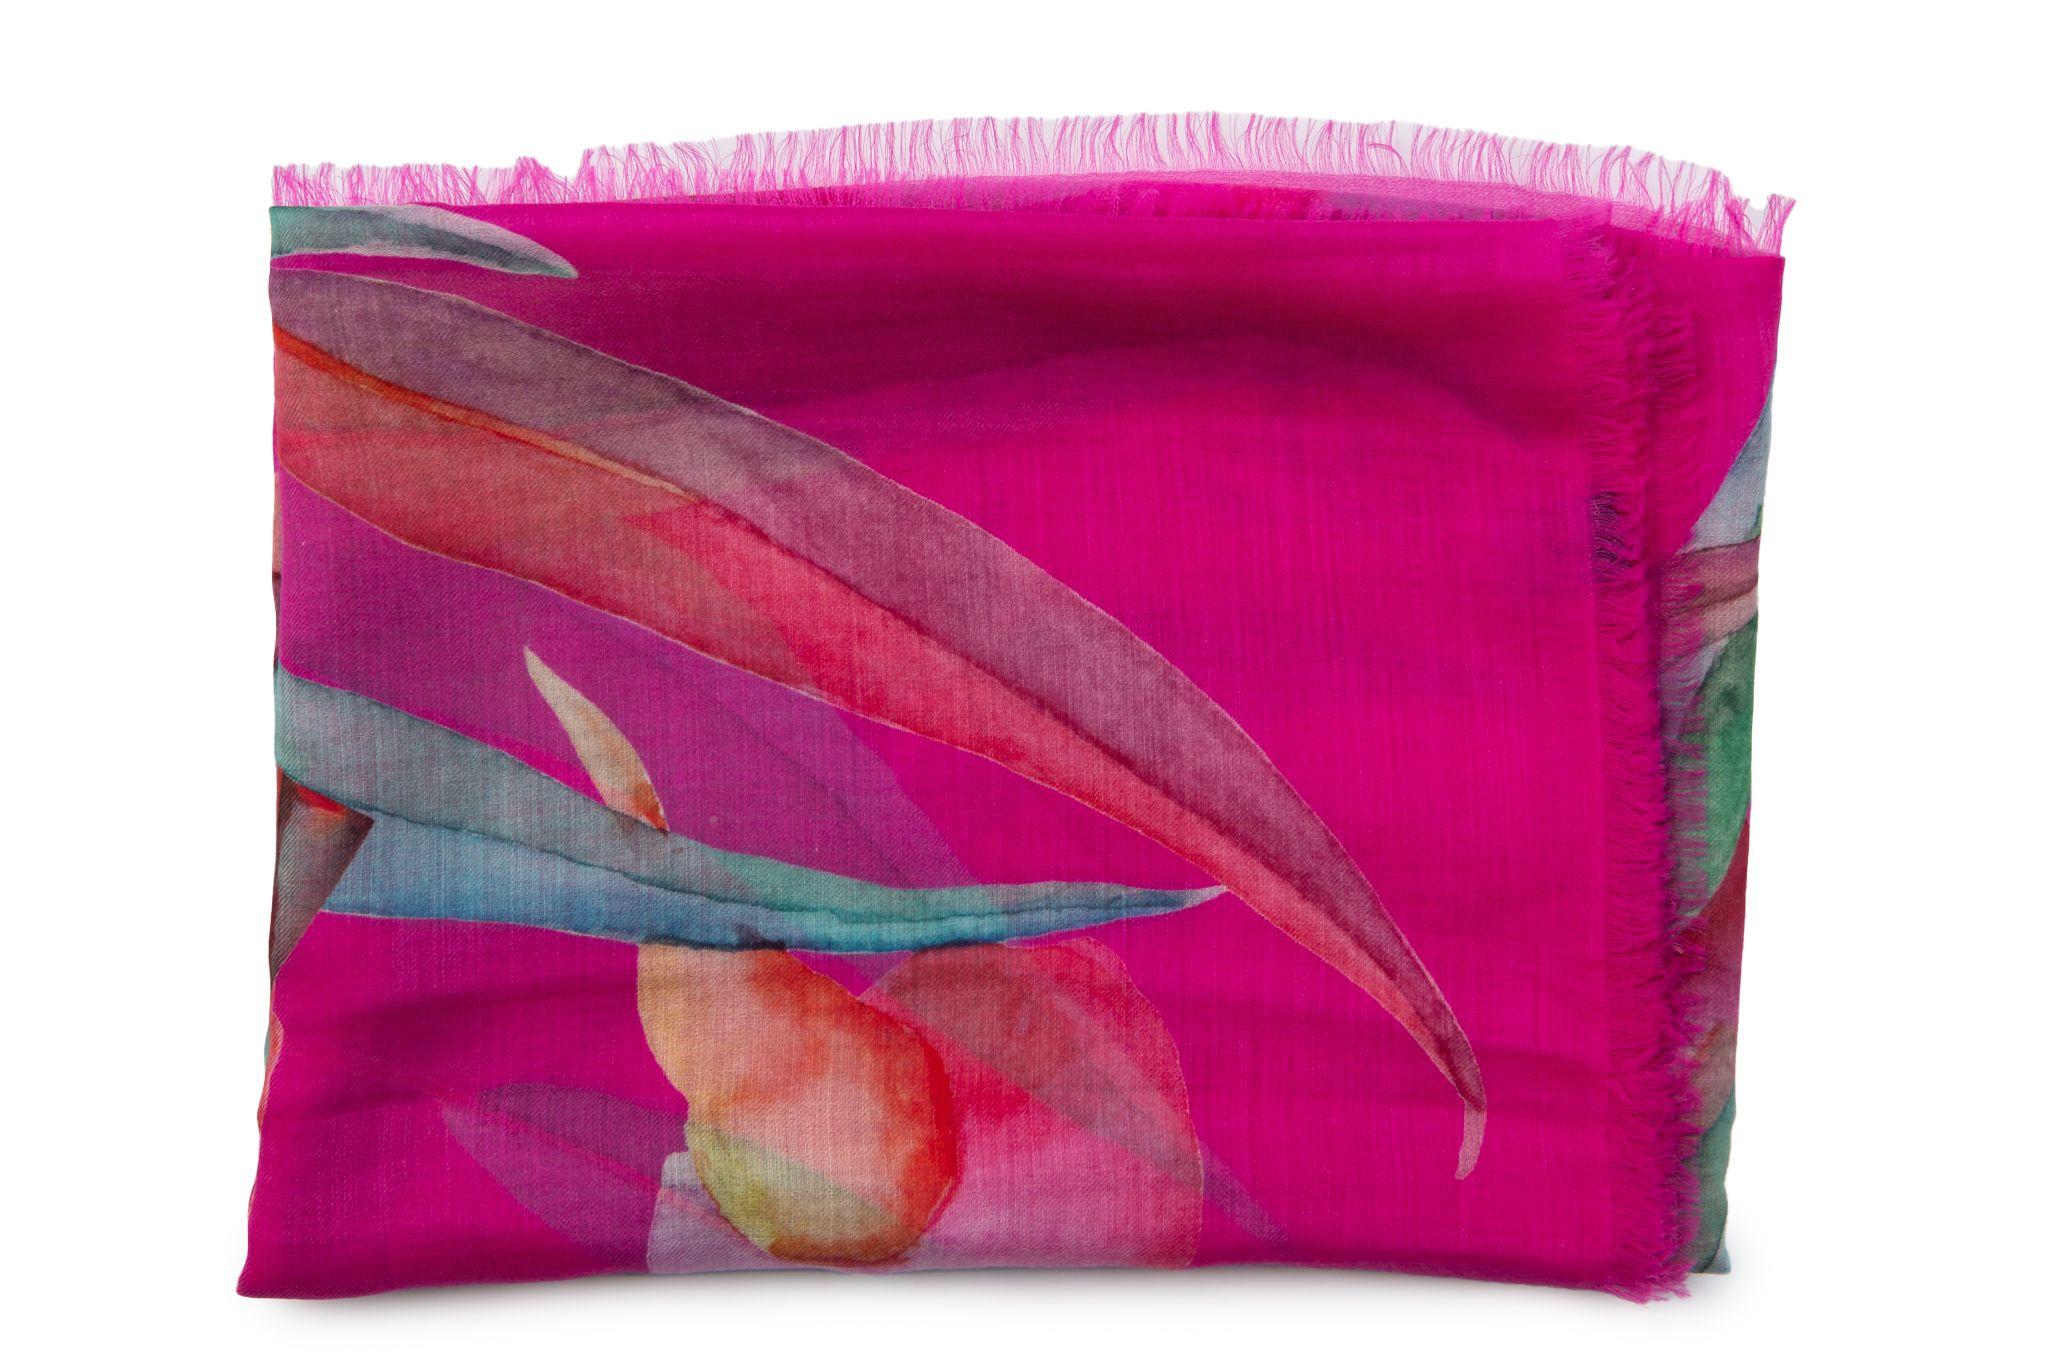 New Chanel fuchsia and multicolor Leaves with Chanel logos cashmere shawl.